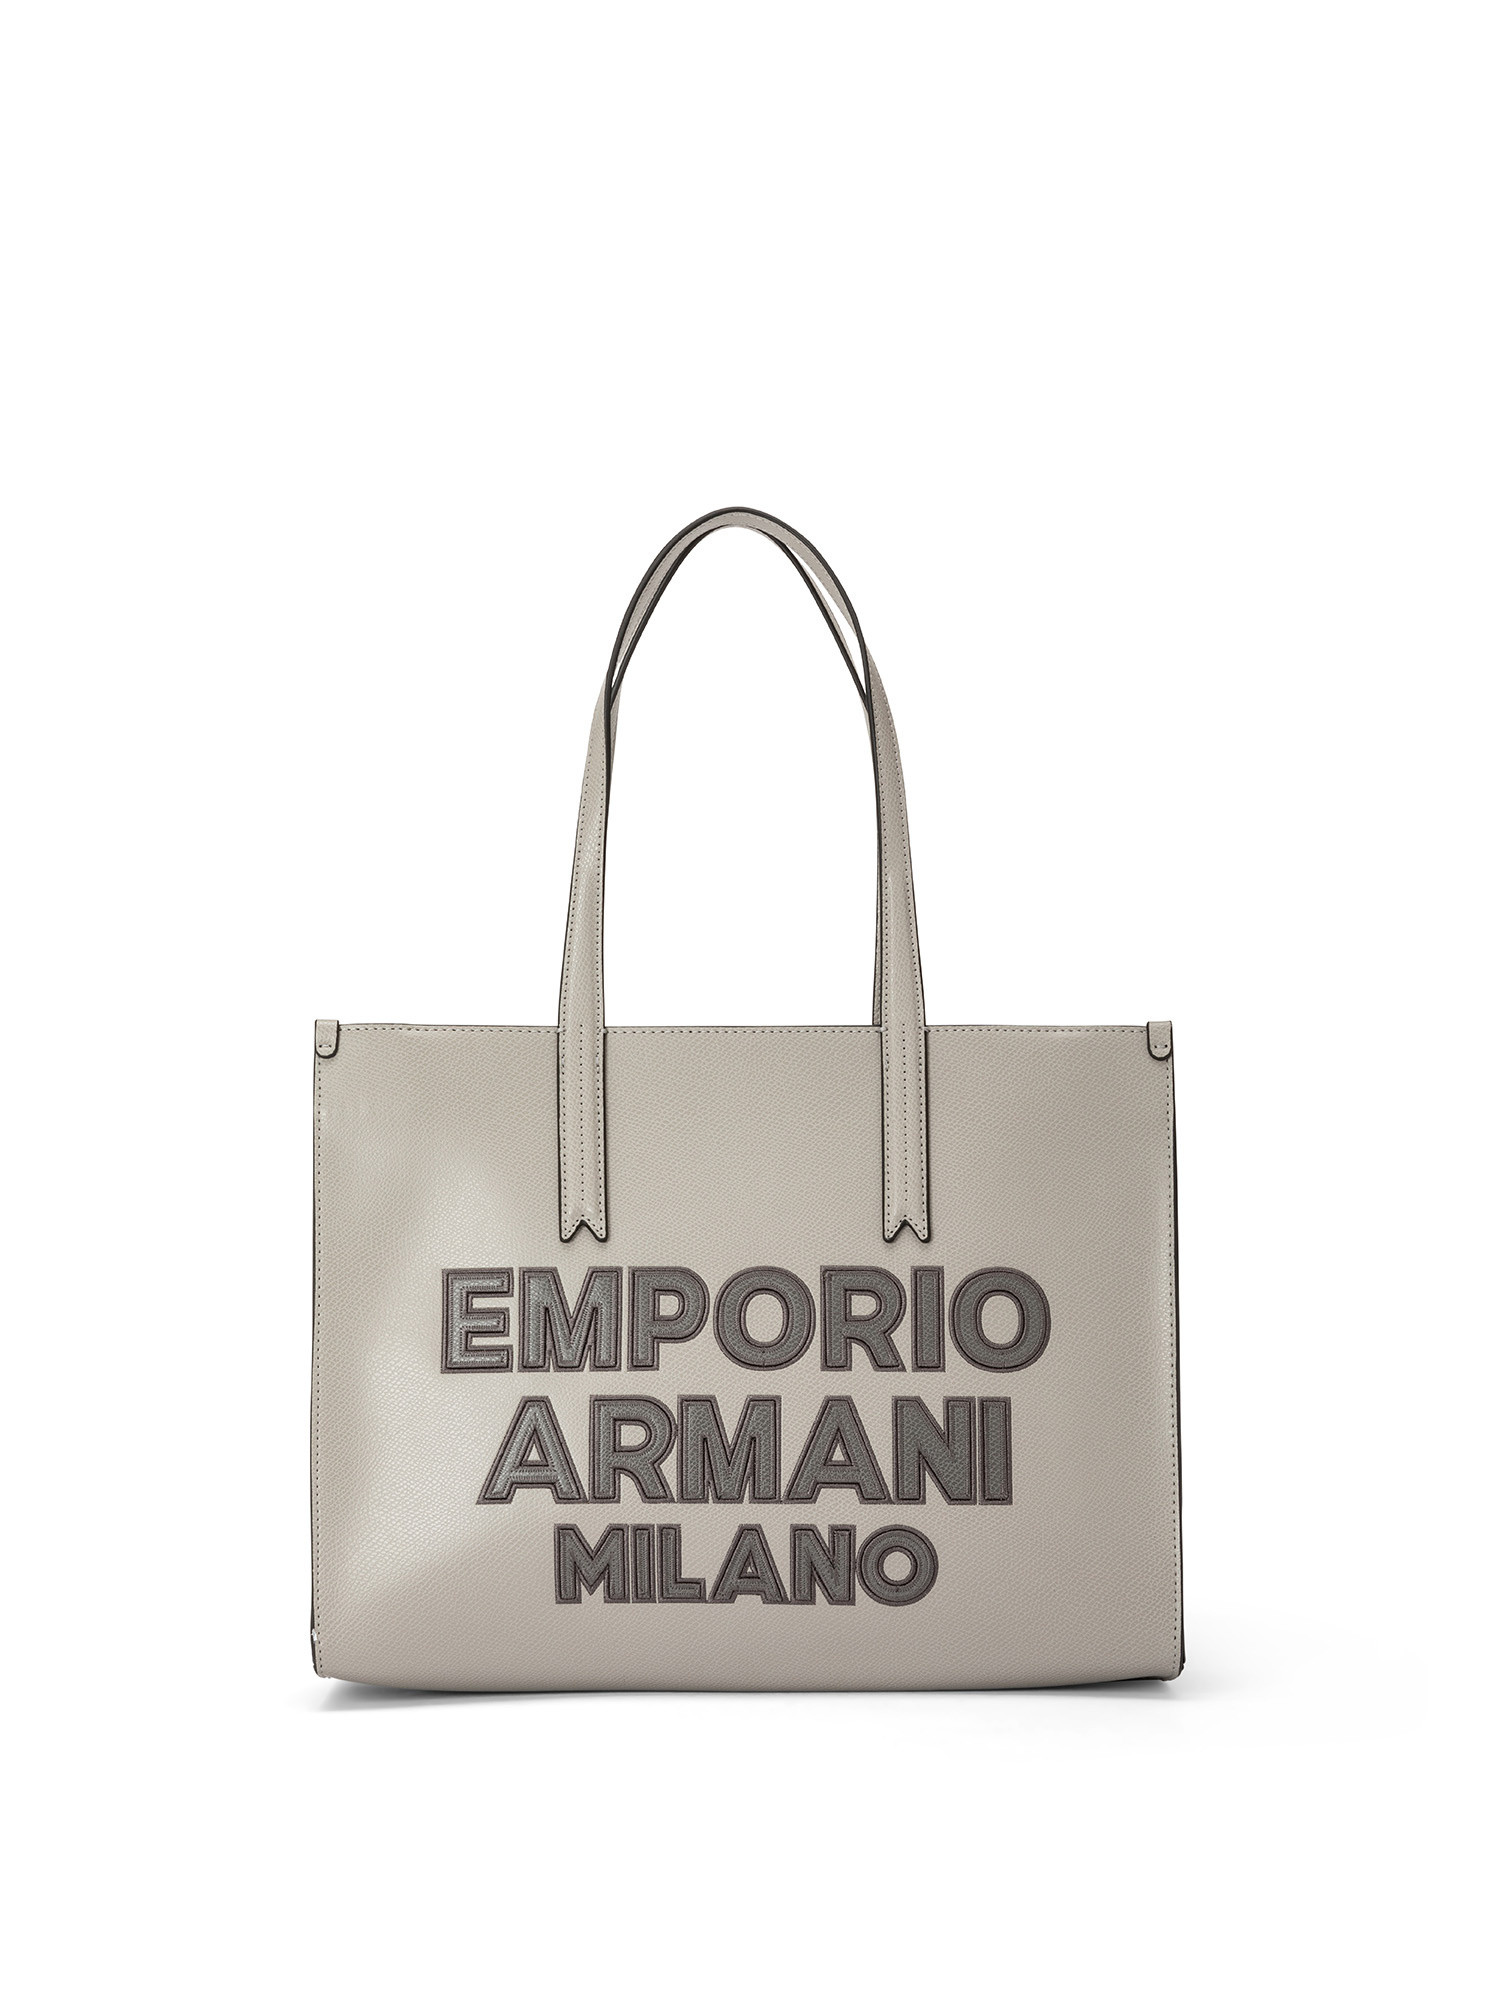 Emporio Armani - Bag with logo embroidery, Grey, large image number 0